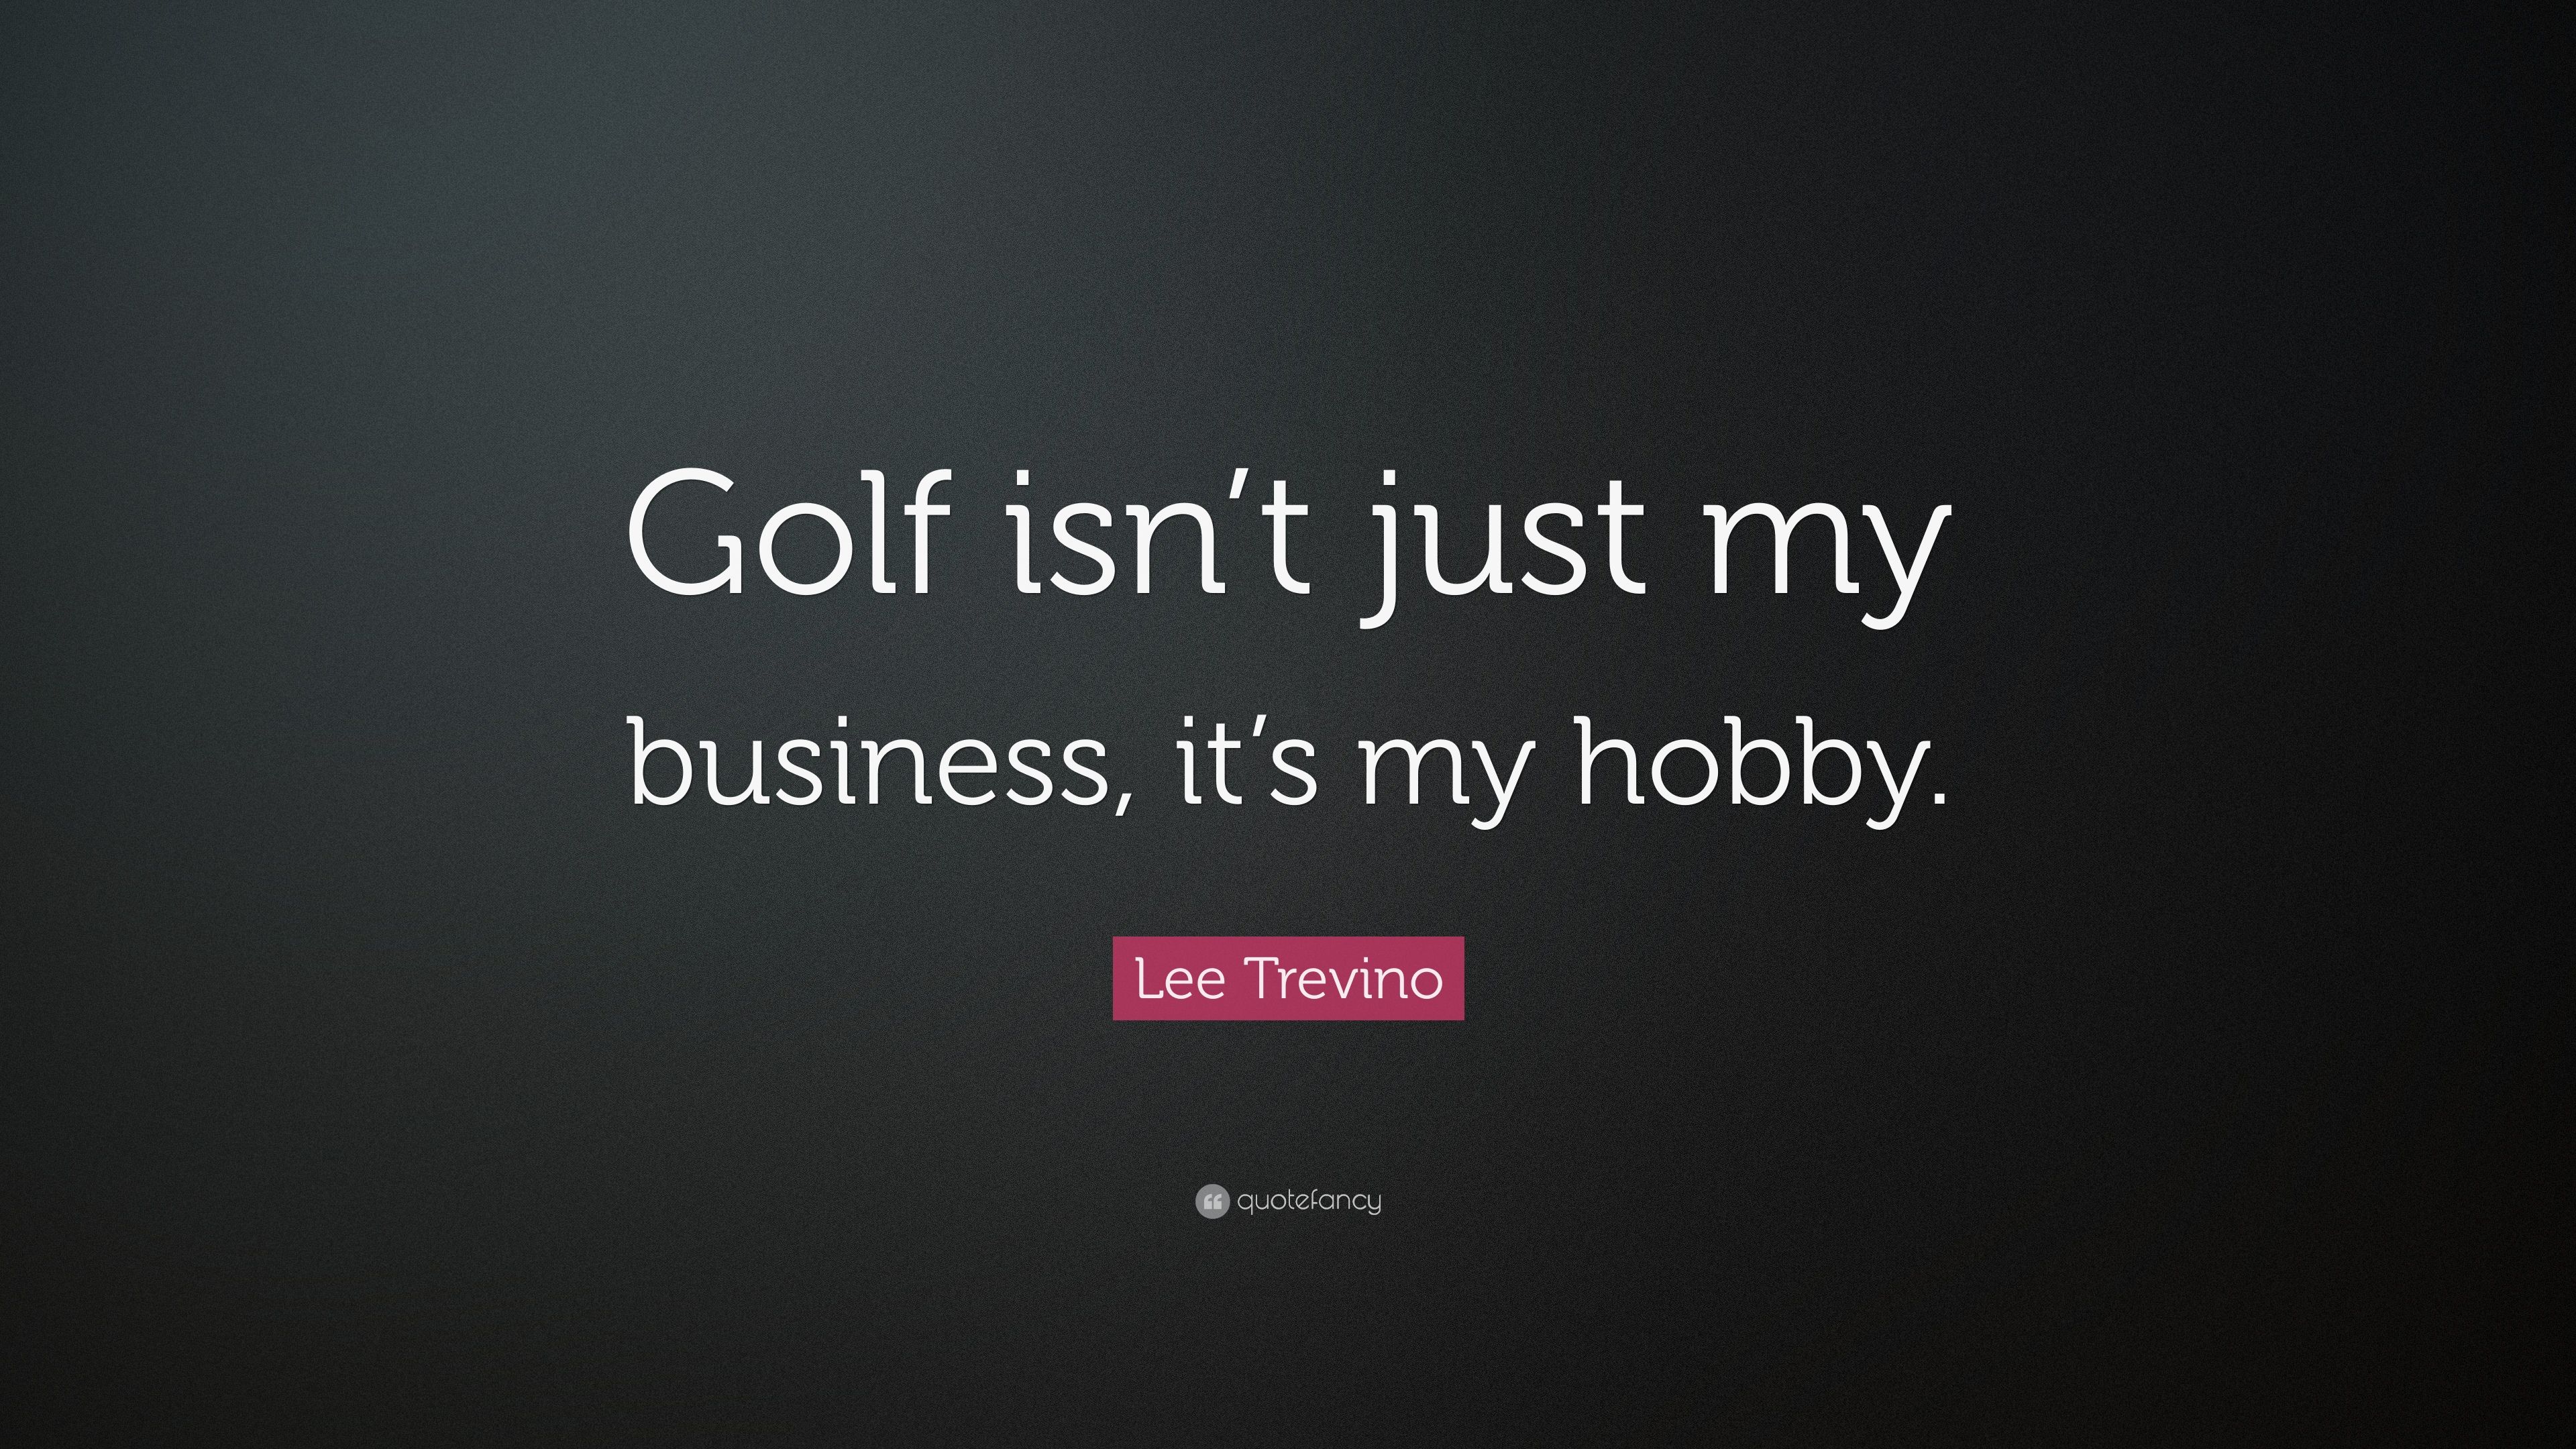 Lee Trevino Quote: “Golf isn't just my business, it's my hobby